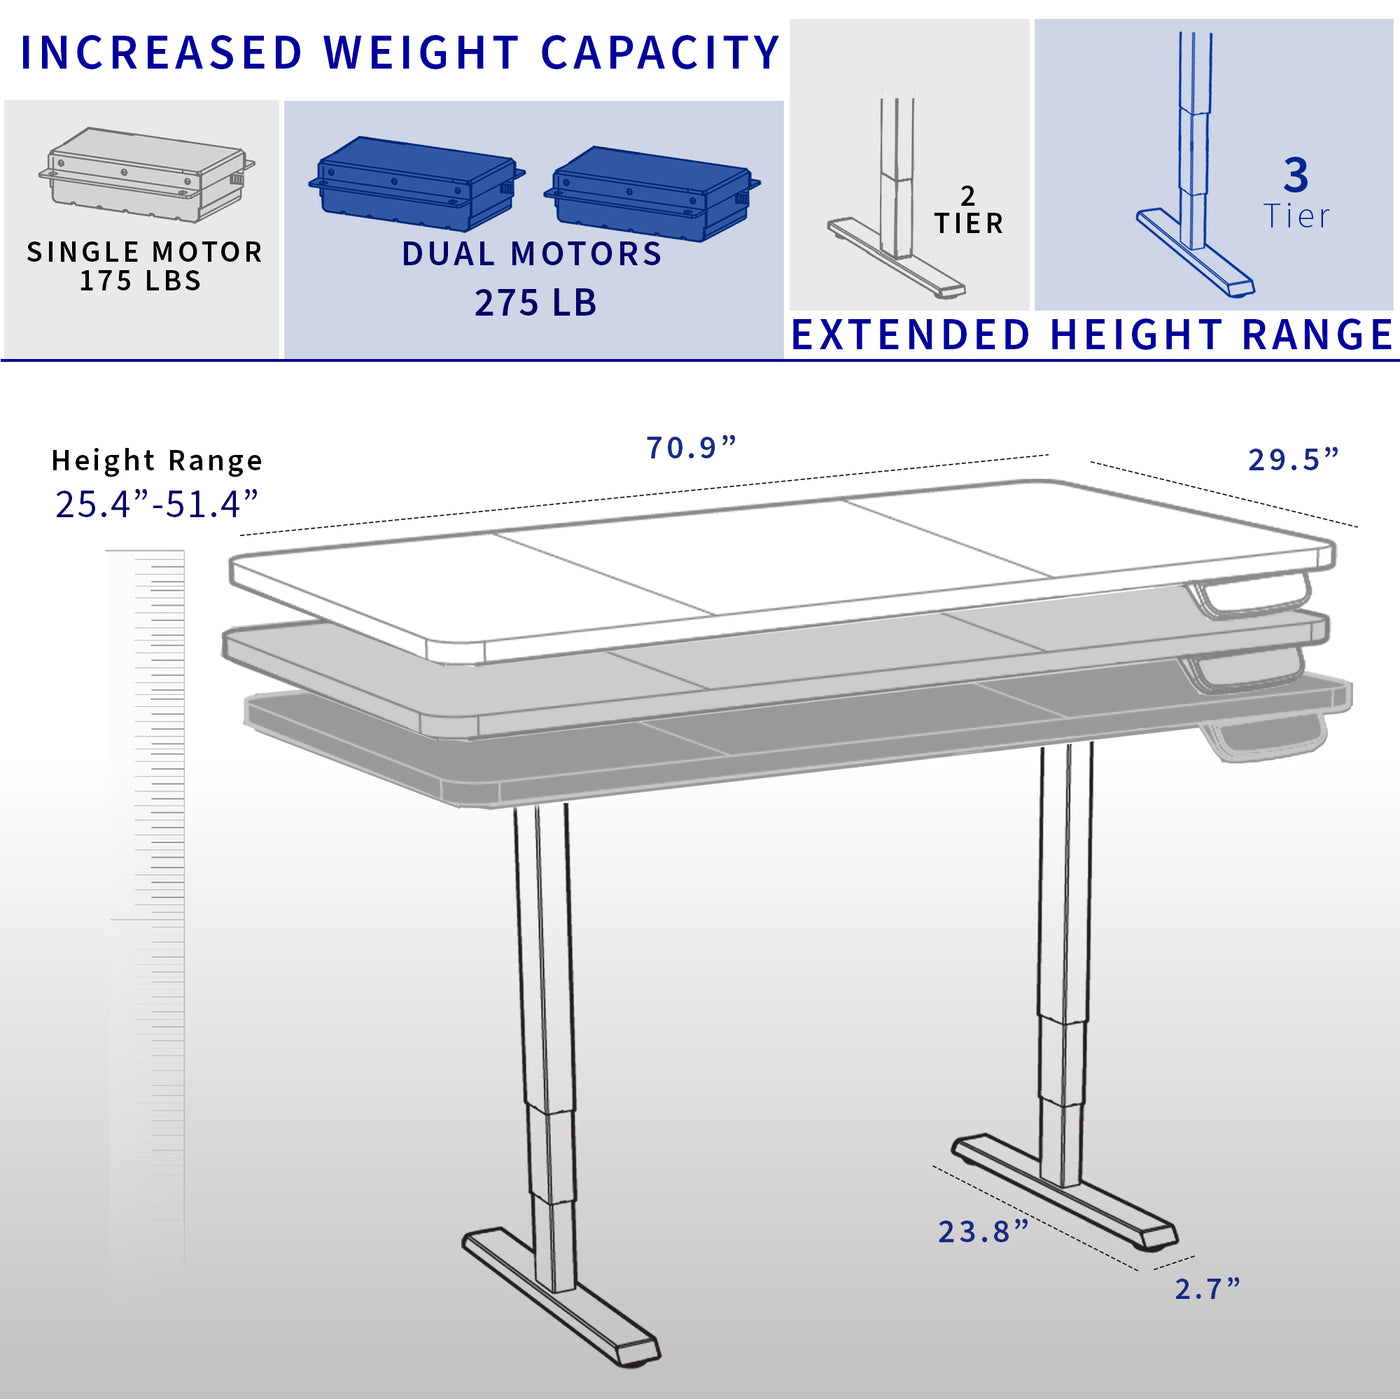 Large sturdy sit or stand active workstation with adjustable height and heavy-duty telescoping legs for support.